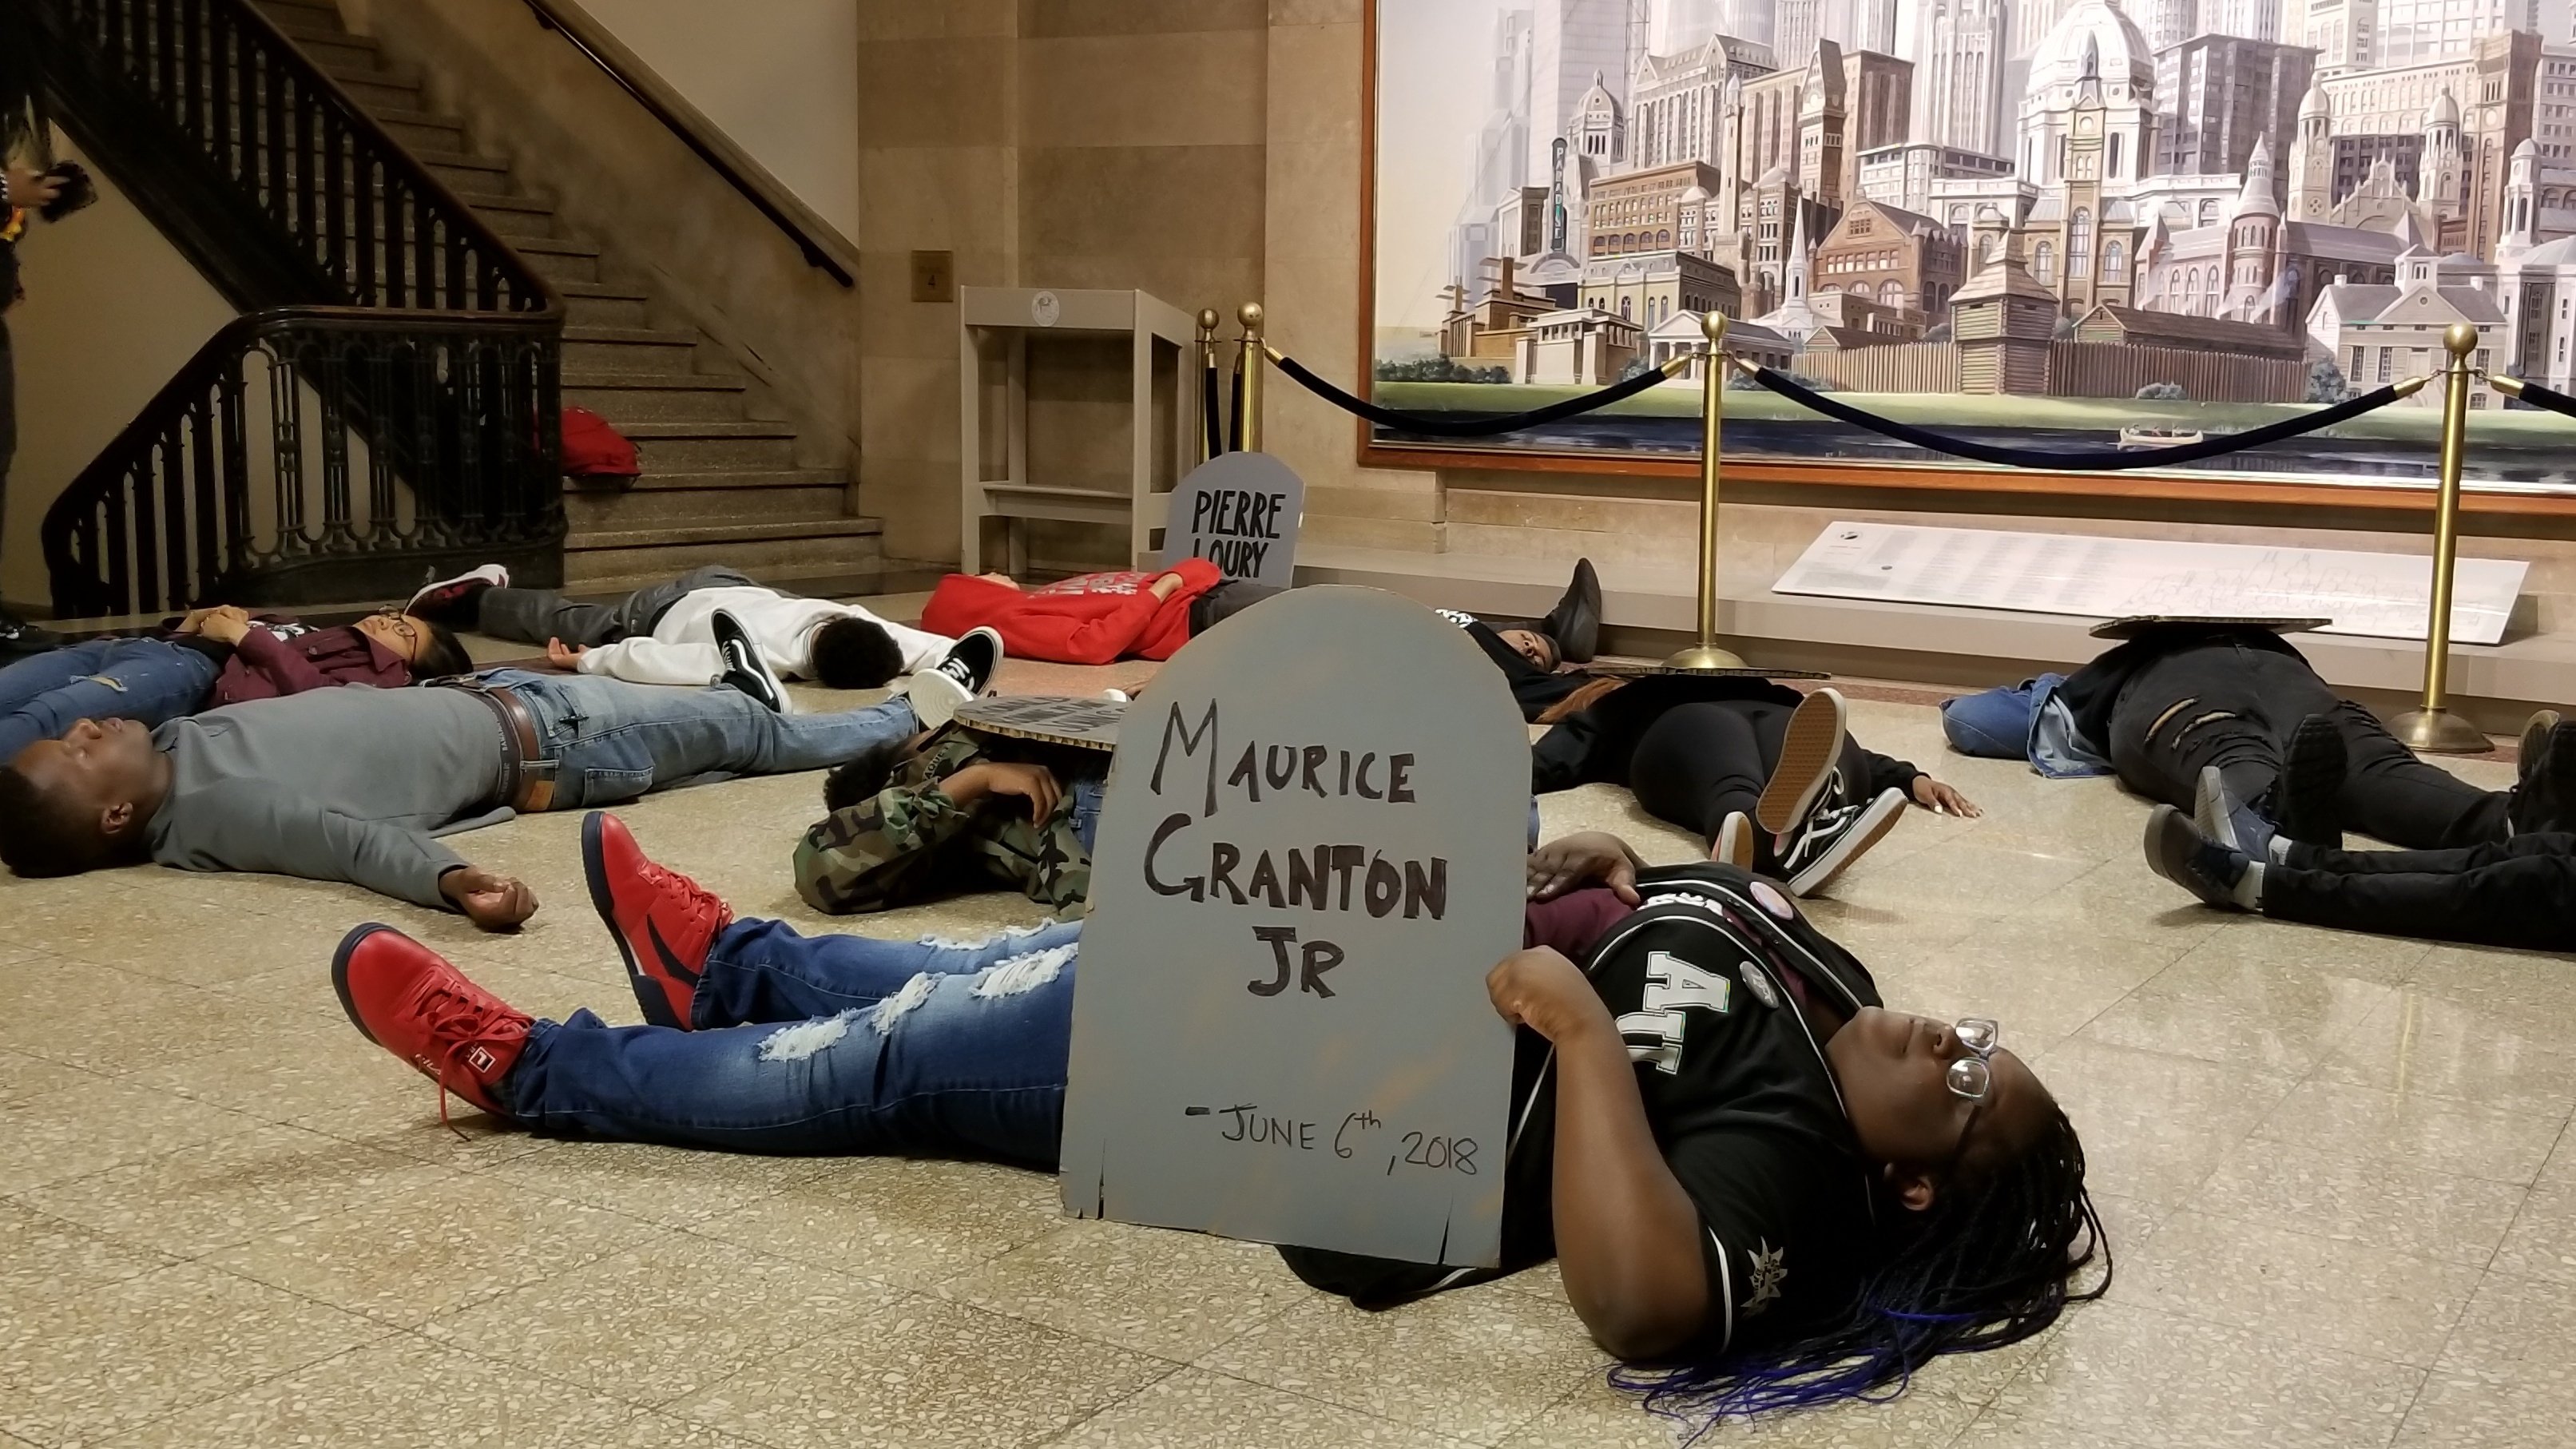 Chicago teens hold a three-minute “die-in” at City Hall on Monday, June 11 in remembrance of Maurice Granton Jr. and others killed by the Chicago Police Department. (Matt Masterson / Chicago Tonight)